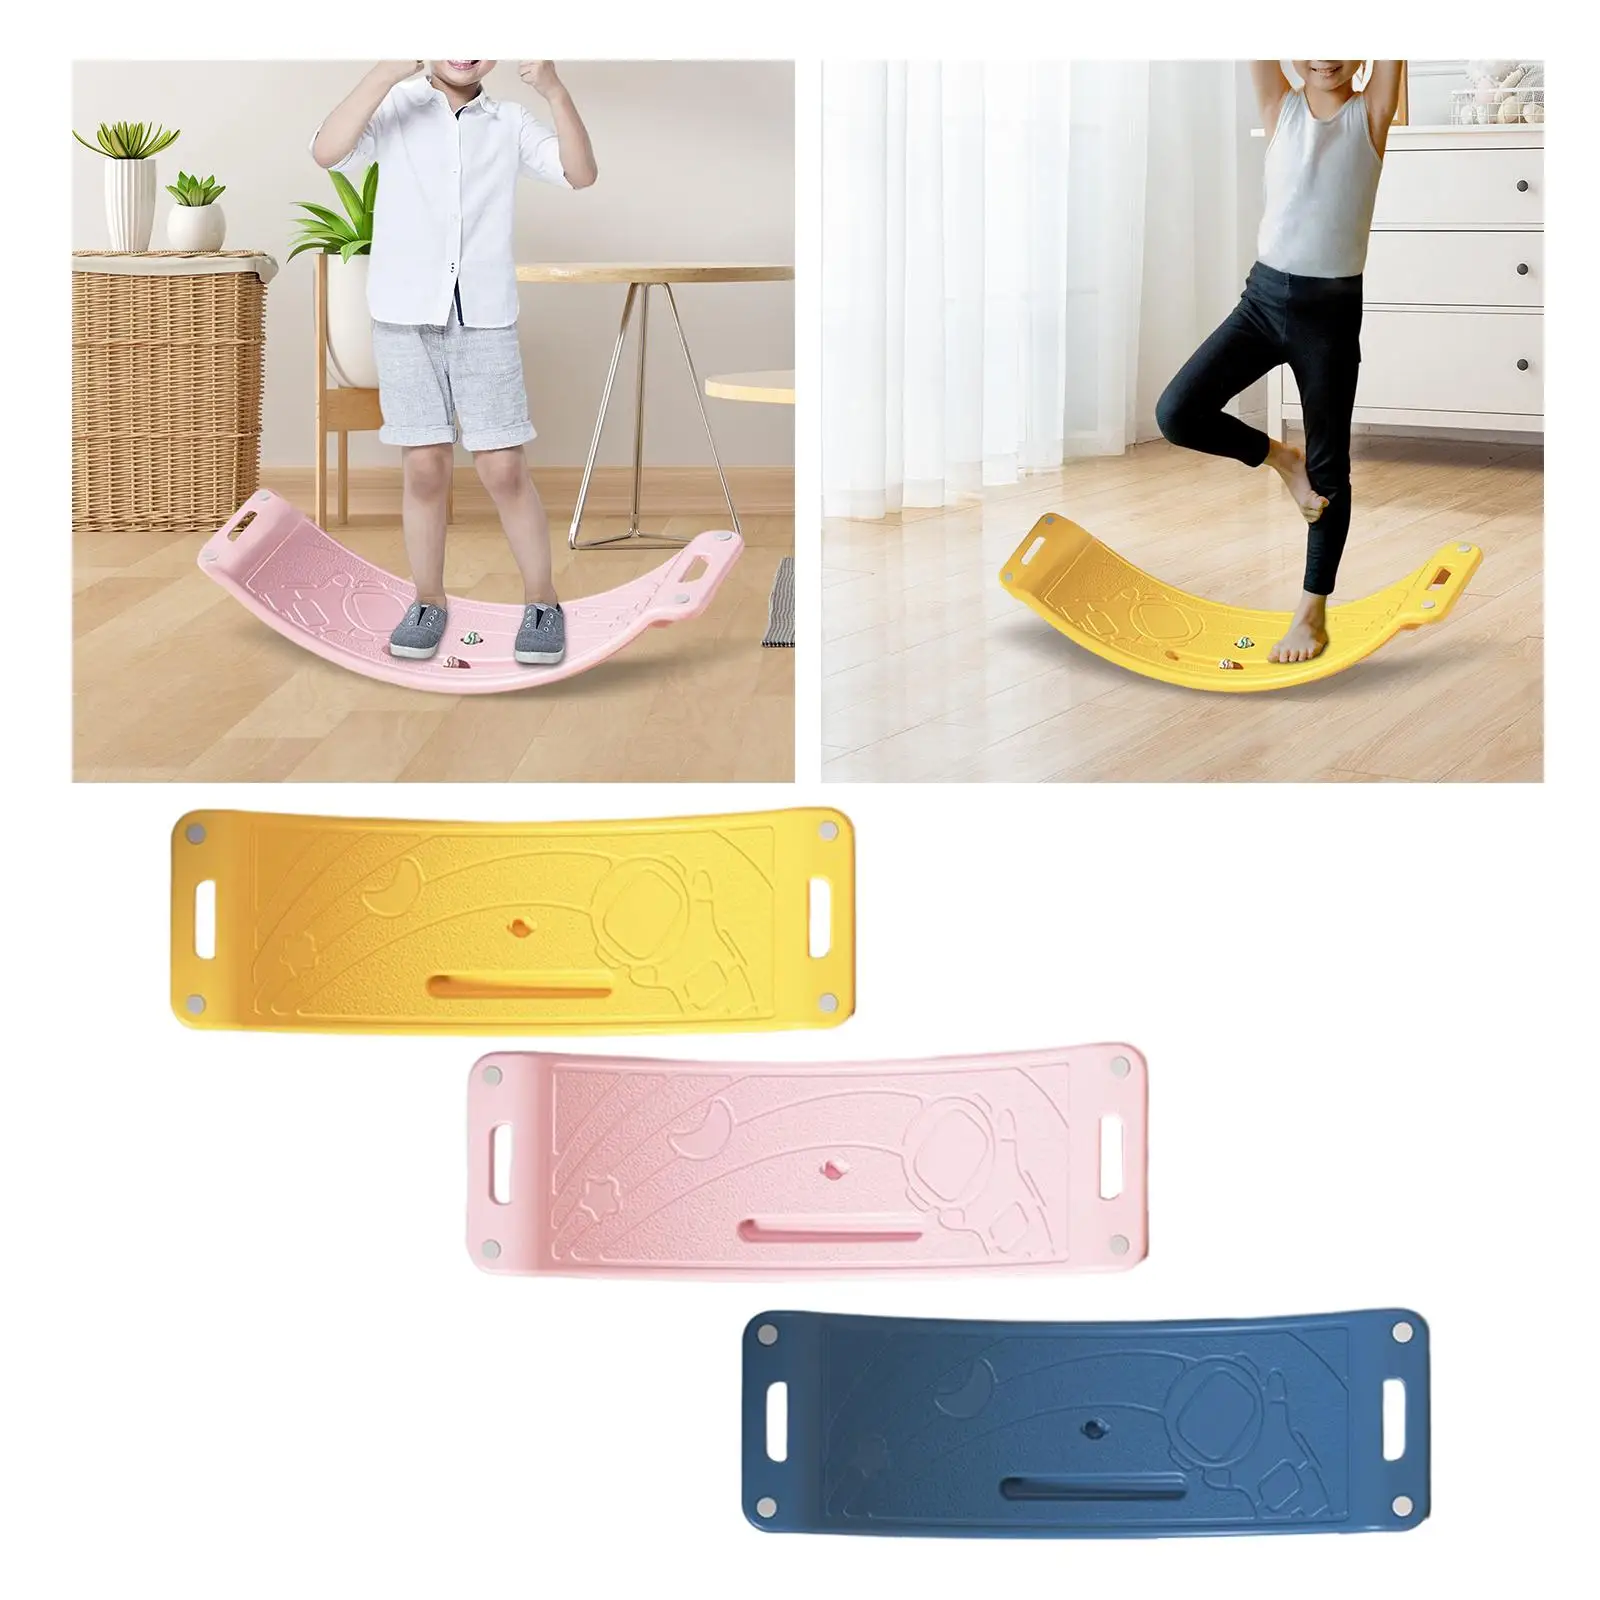 Balance Board Curved Rocker Board Seesaw Toy with Ball for Fitness Equipment